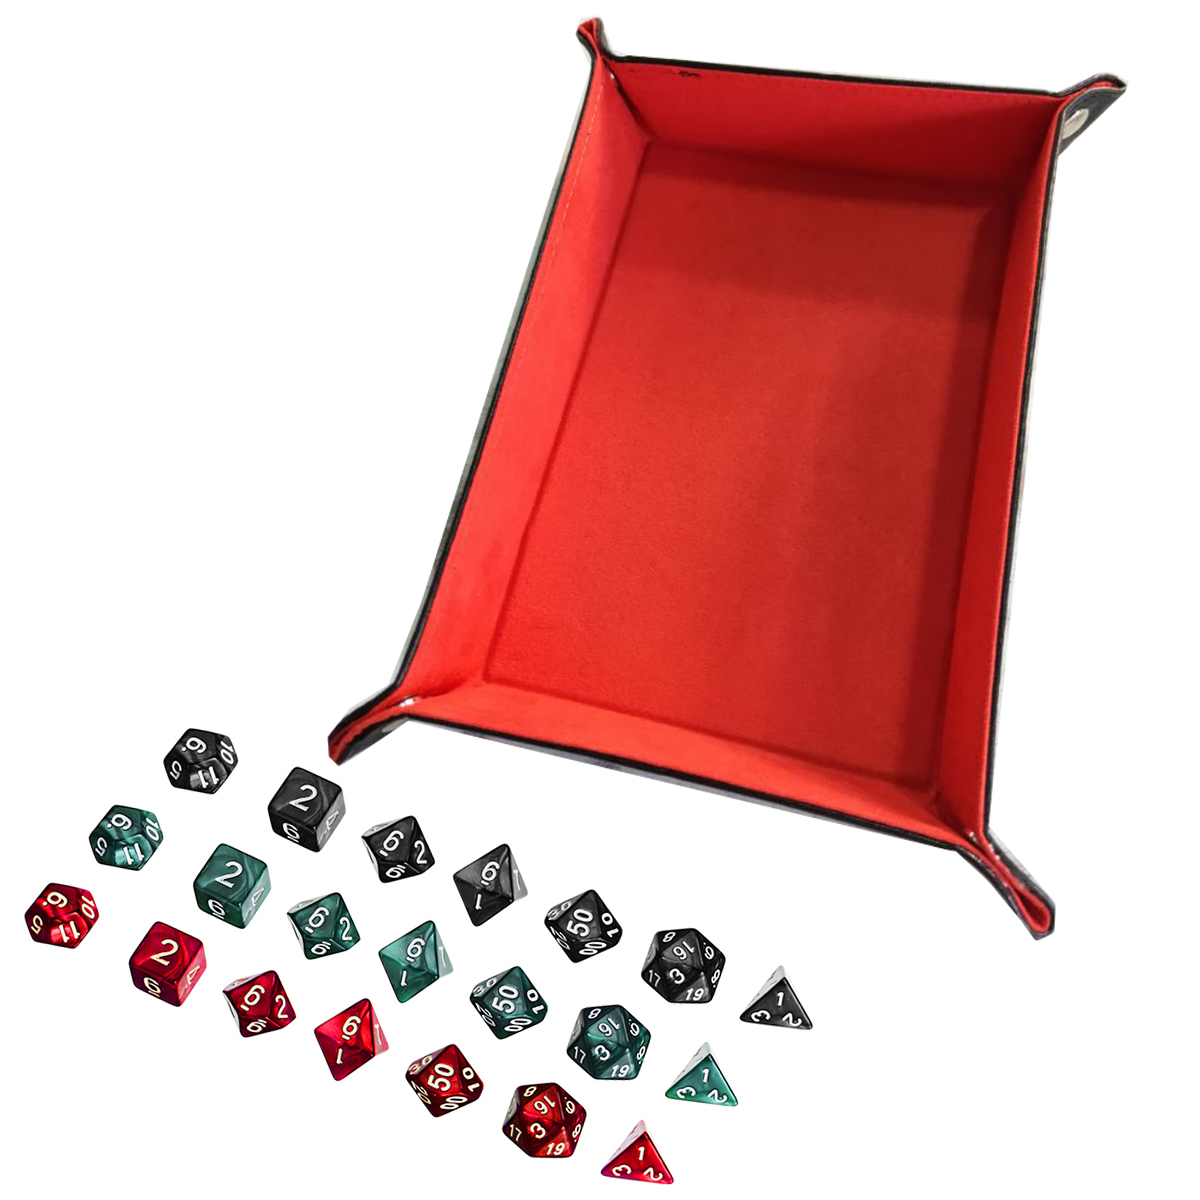 Multisided-Dice-Holder-Polyhedral-Dices-PU-Leather-Folding-Rectangle-Tray-for-RPG-1372549-1